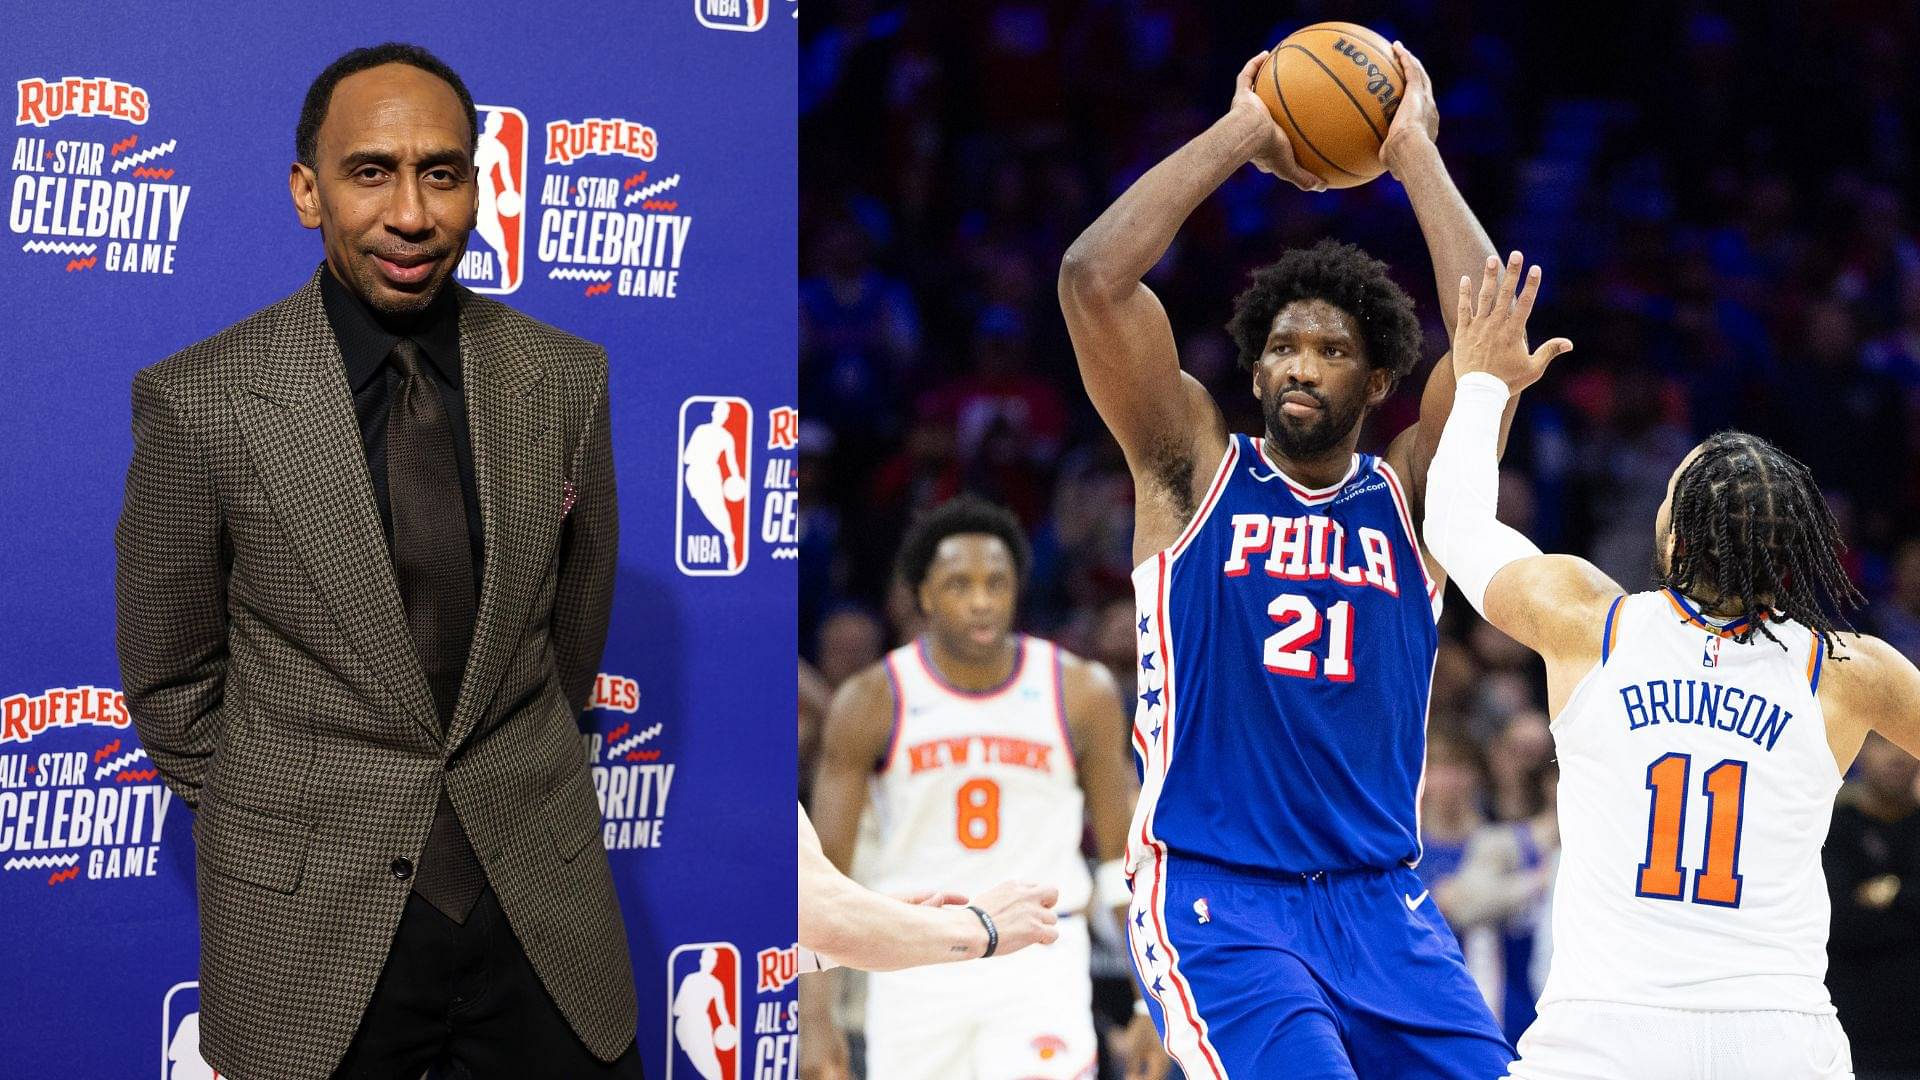 “He Can Do What He Wants”: Knicks Super Fan Hypes Up ‘Healthy’ Joel Embiid as The Greatest Big Man Ever